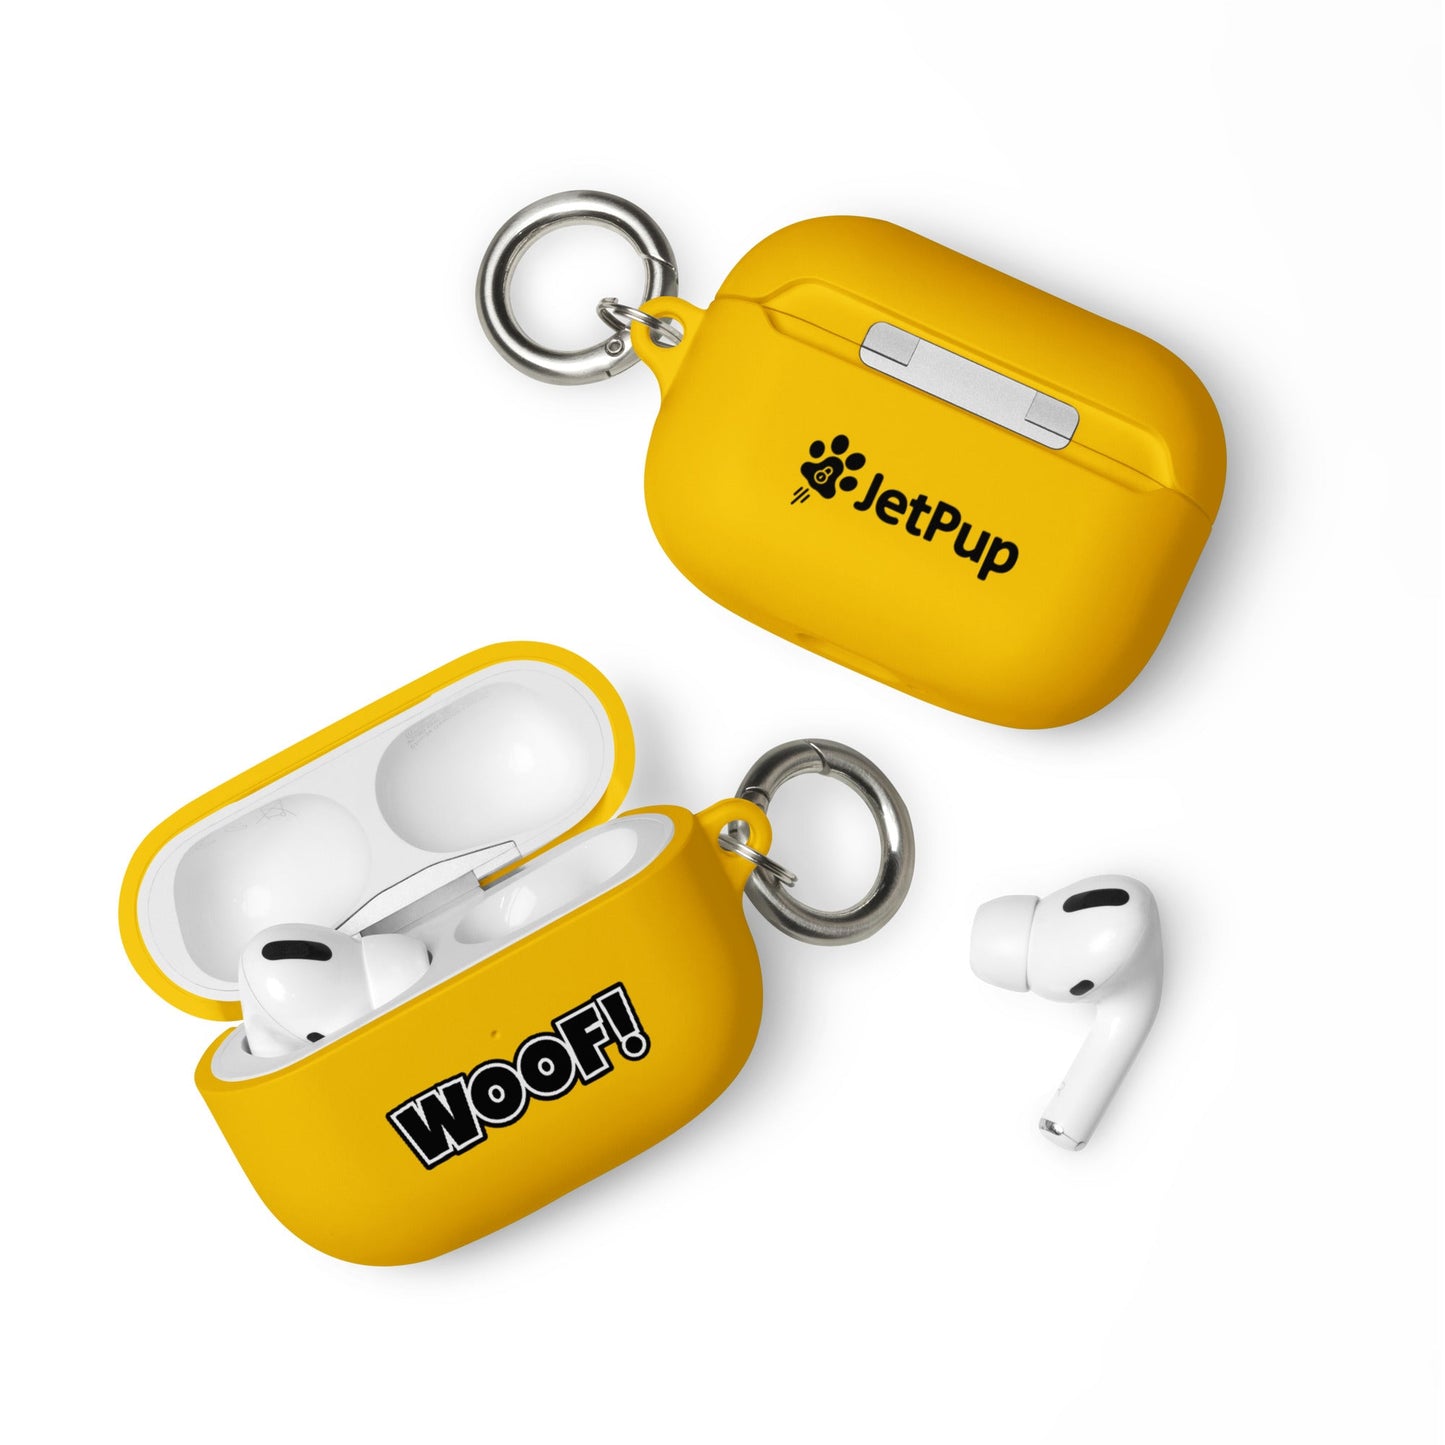 Woof AirPods Case - Yellow - JetPup